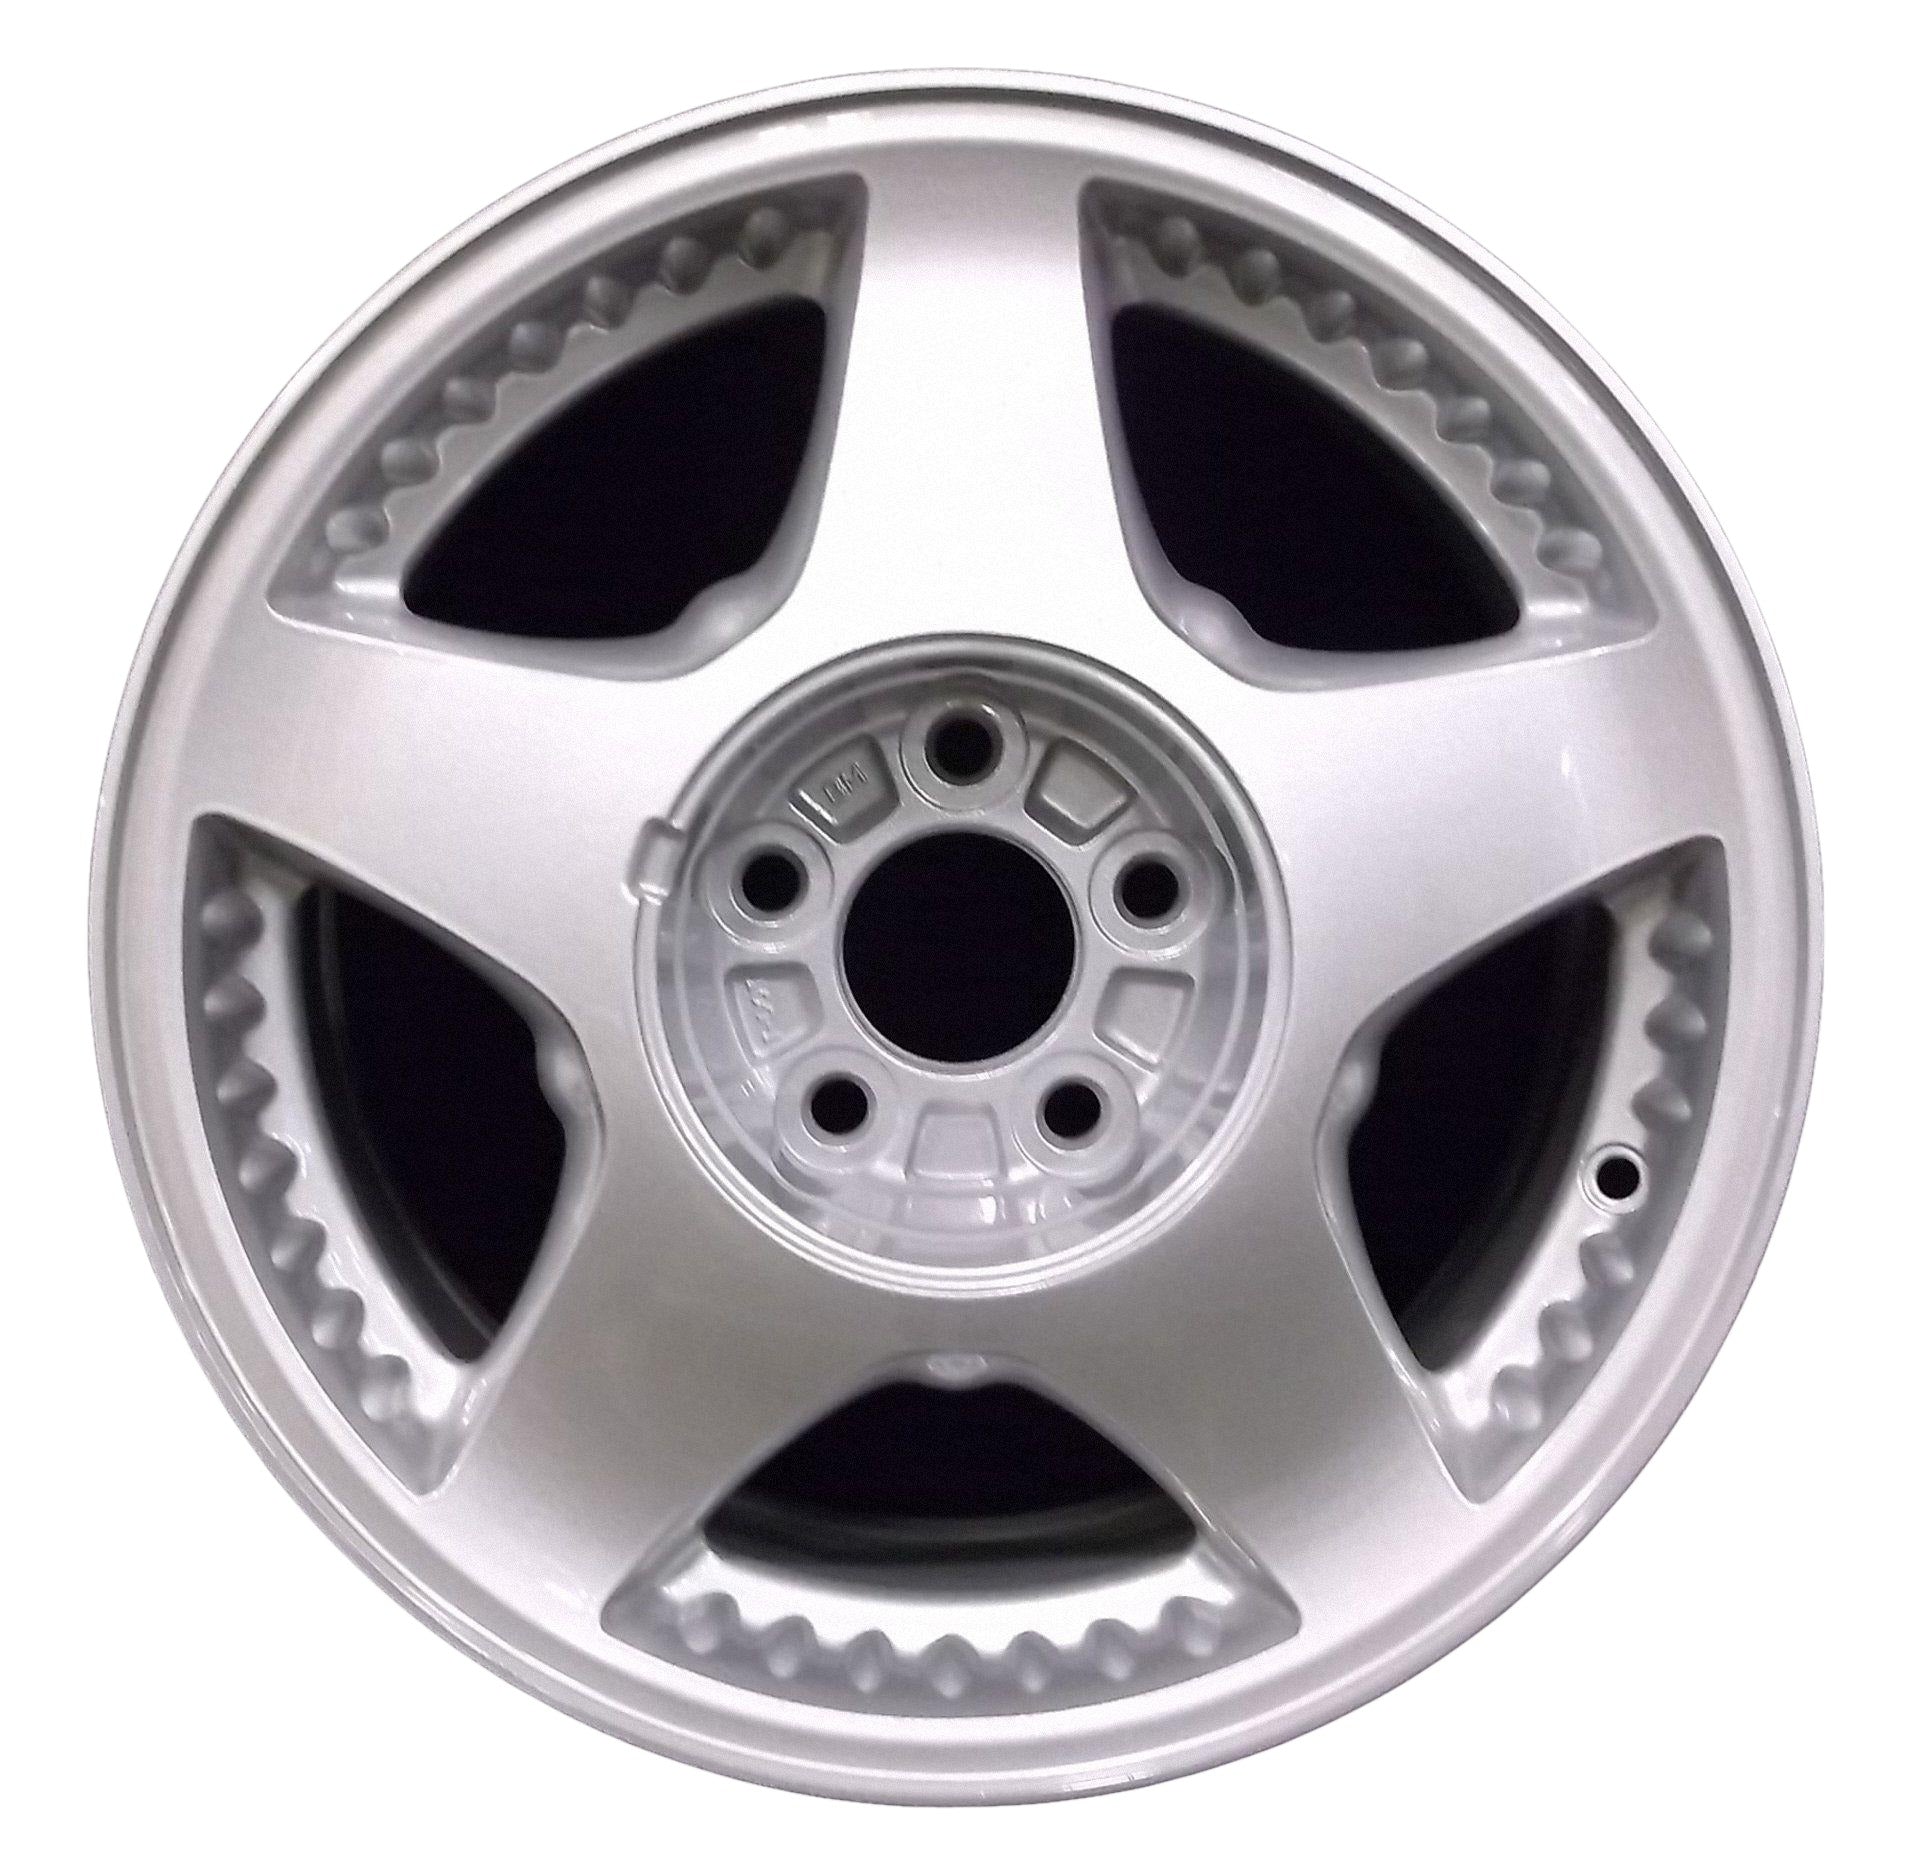 Ford Windstar  1999, 2000, 2001, 2002, 2003 Factory OEM Car Wheel Size 16x6.5 Alloy WAO.3565A.PS02.FF